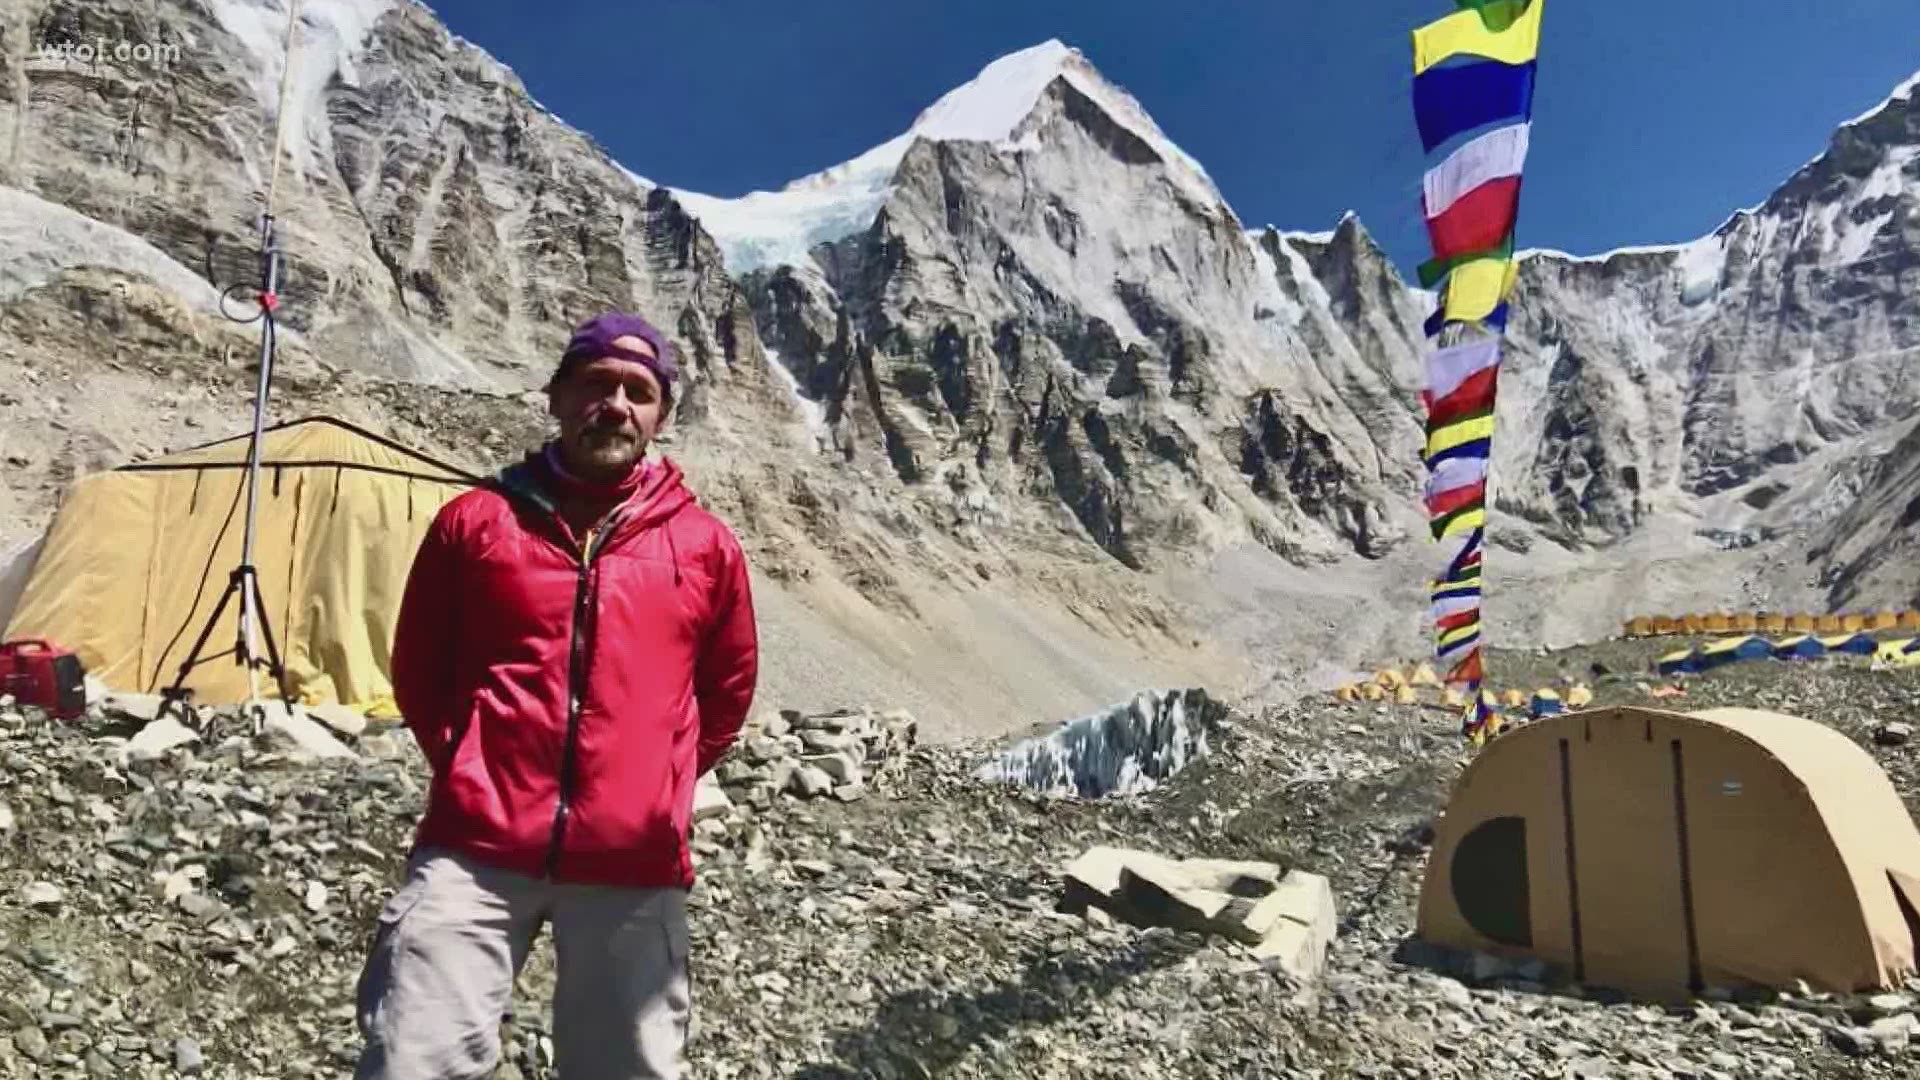 It took Kris Brickman nearly two years to prepare his body for the grueling test of climbing the tallest mountain in the world.